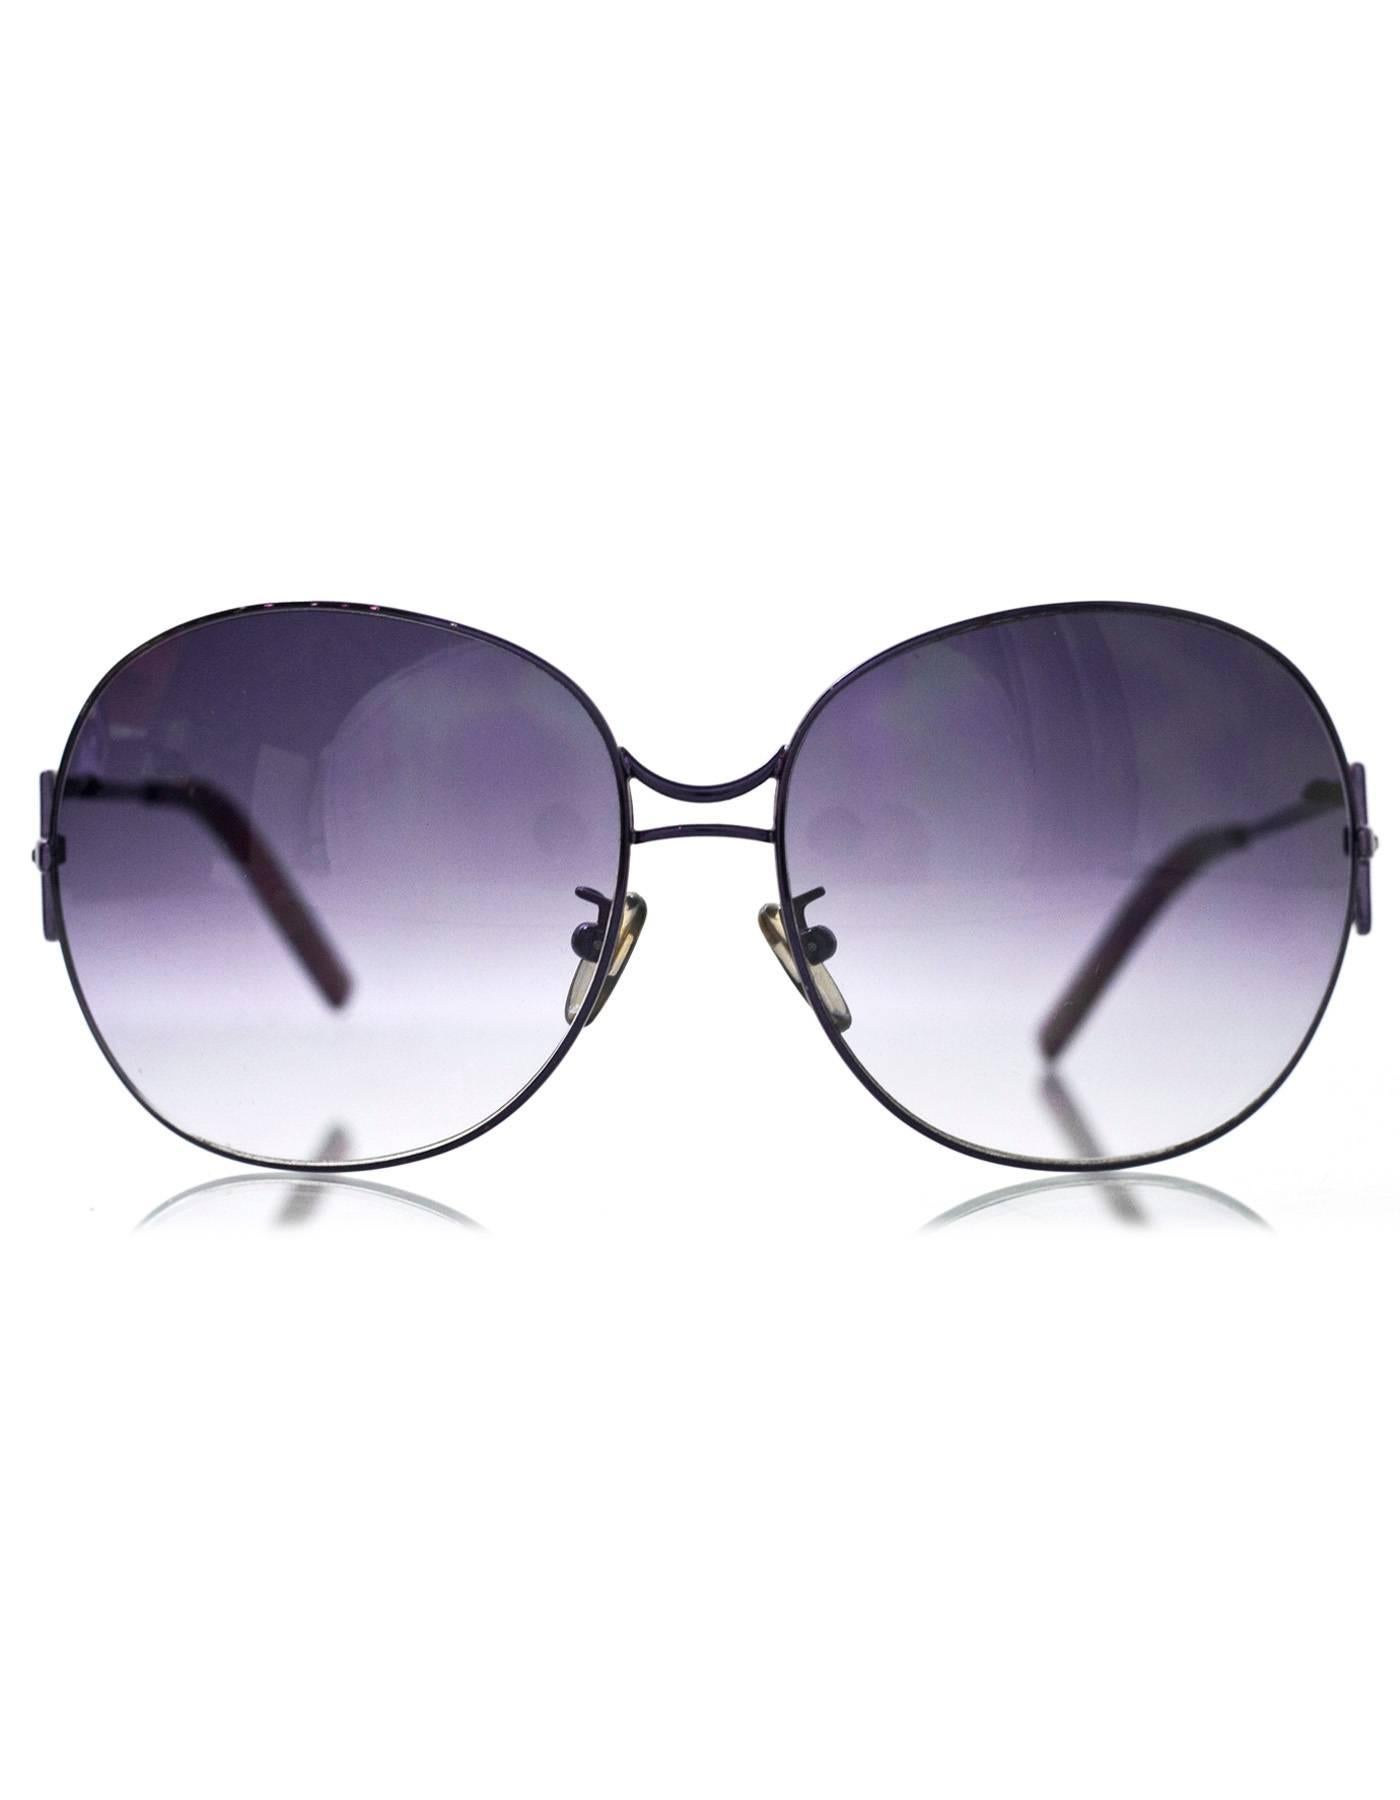 Fendi Purple Round Sunglasses with Case In Excellent Condition In New York, NY